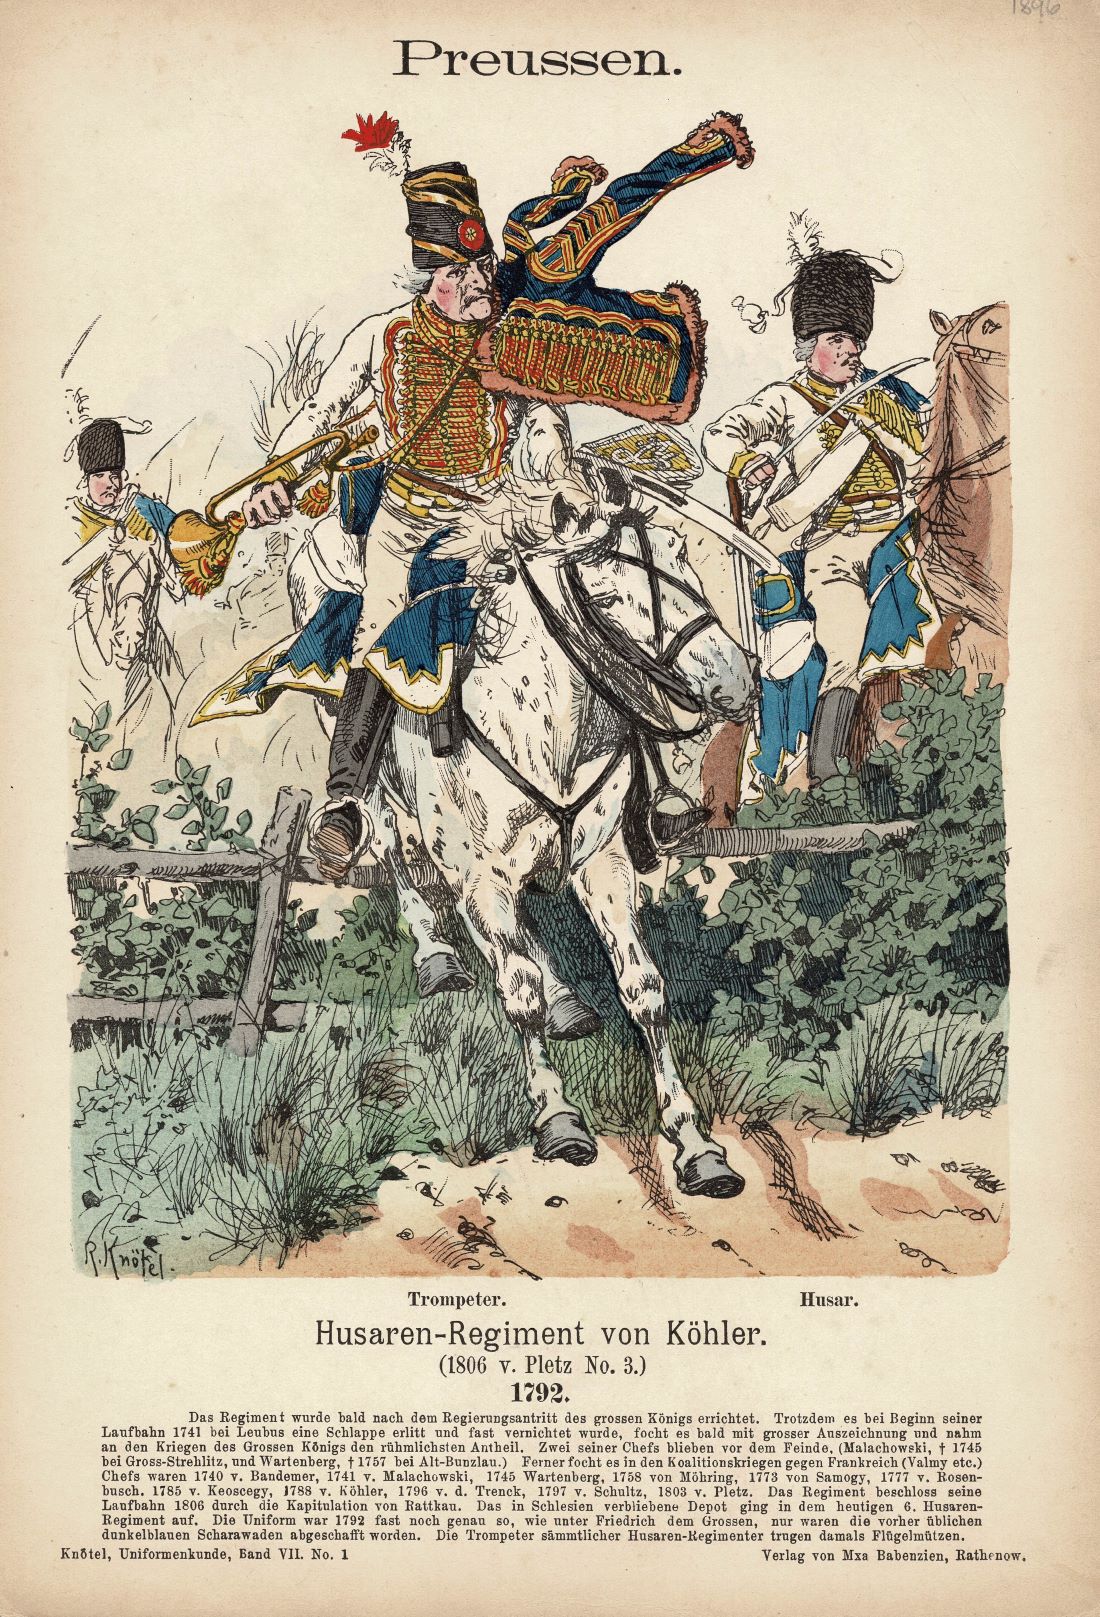 Prussian Hussar's Uniforms from 1792 by Richard Knötel published 1896